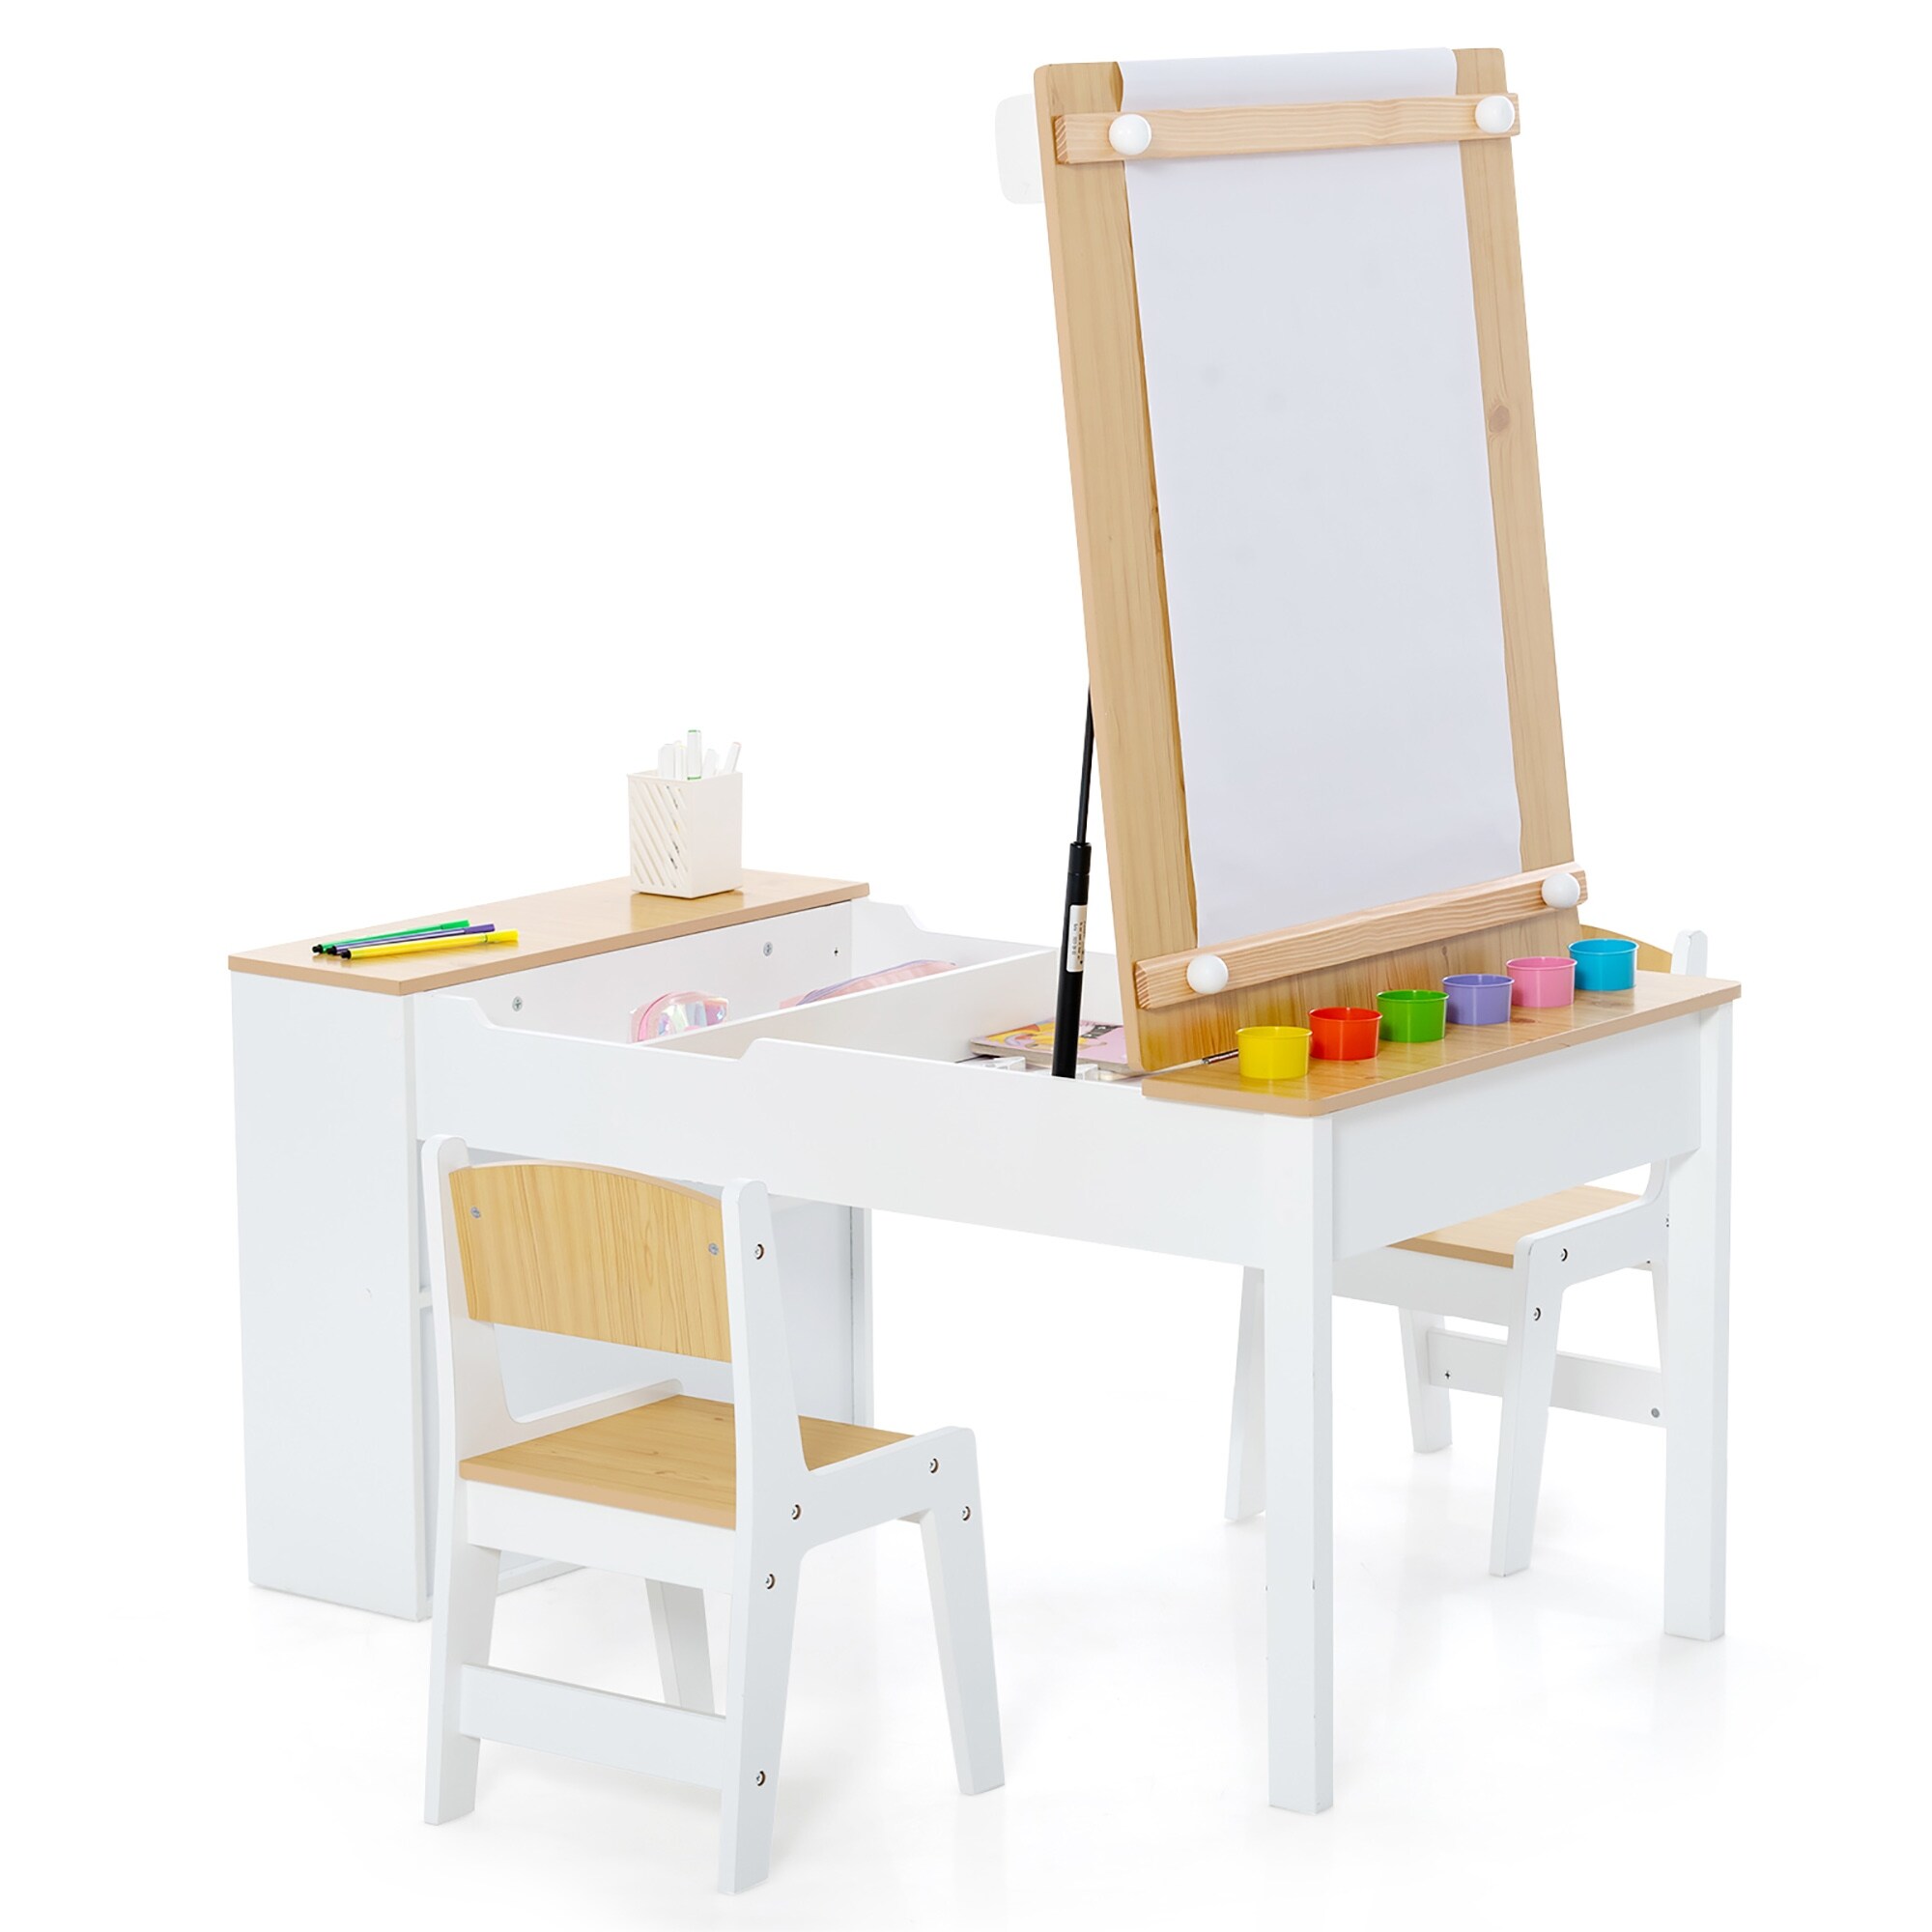 Gymax 2 in 1 Kids Easel Desk Chair Set Book Rack Adjustable Art Painting Board Blue/Gray Gray